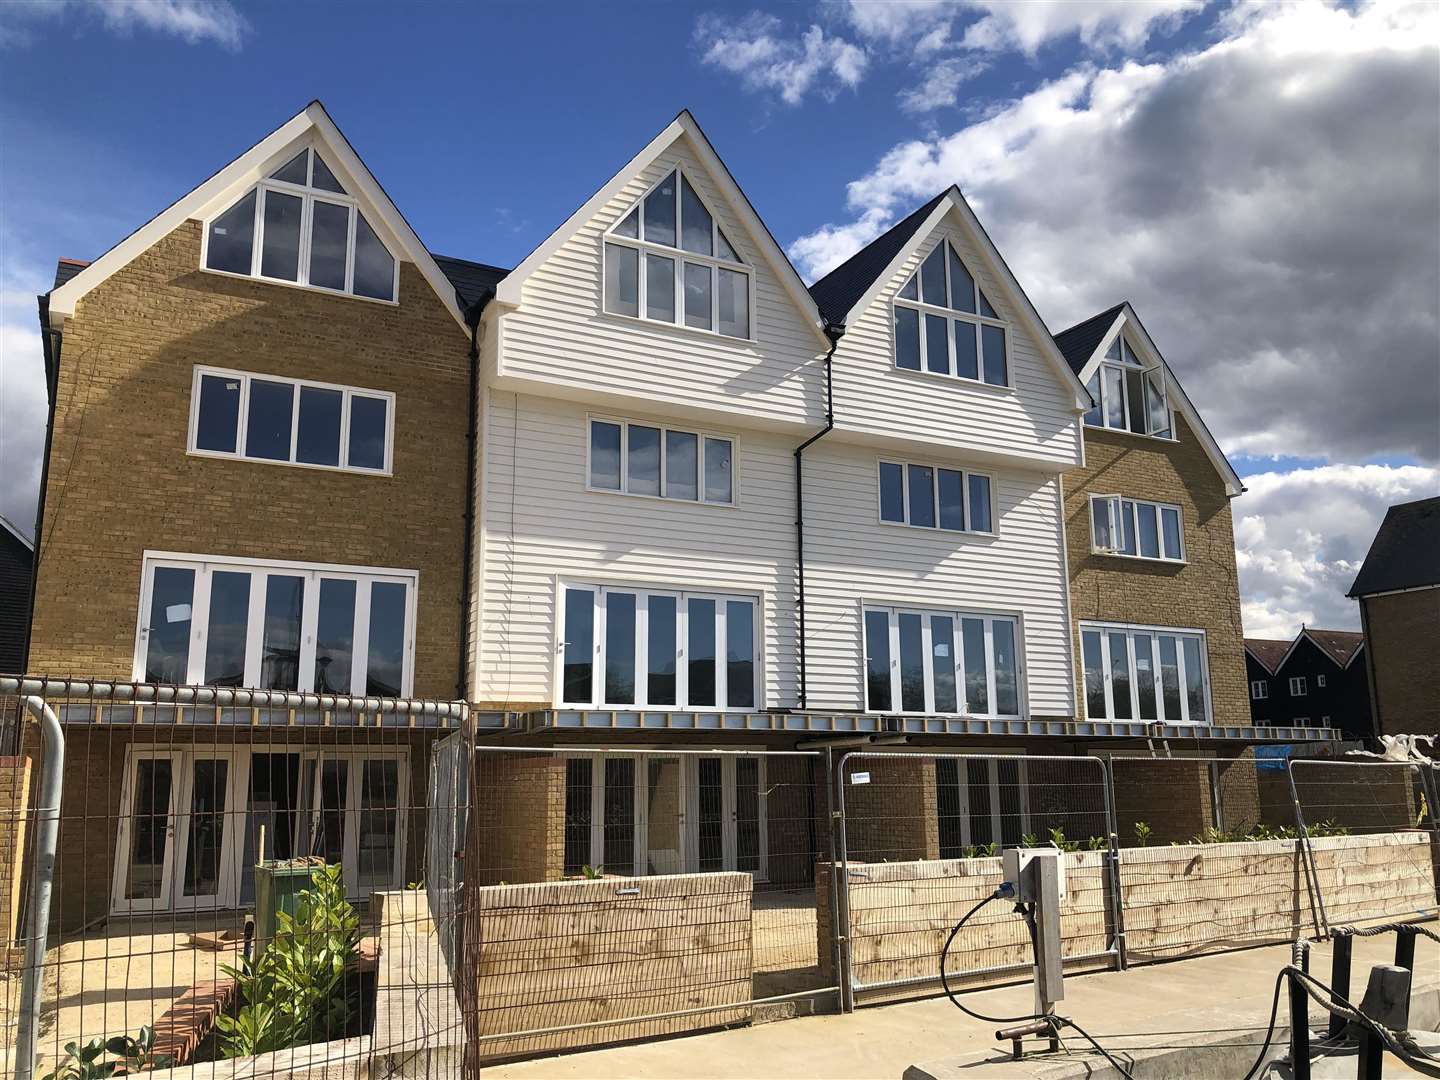 Luxury terraced houses nearing completion along Faversham Creek